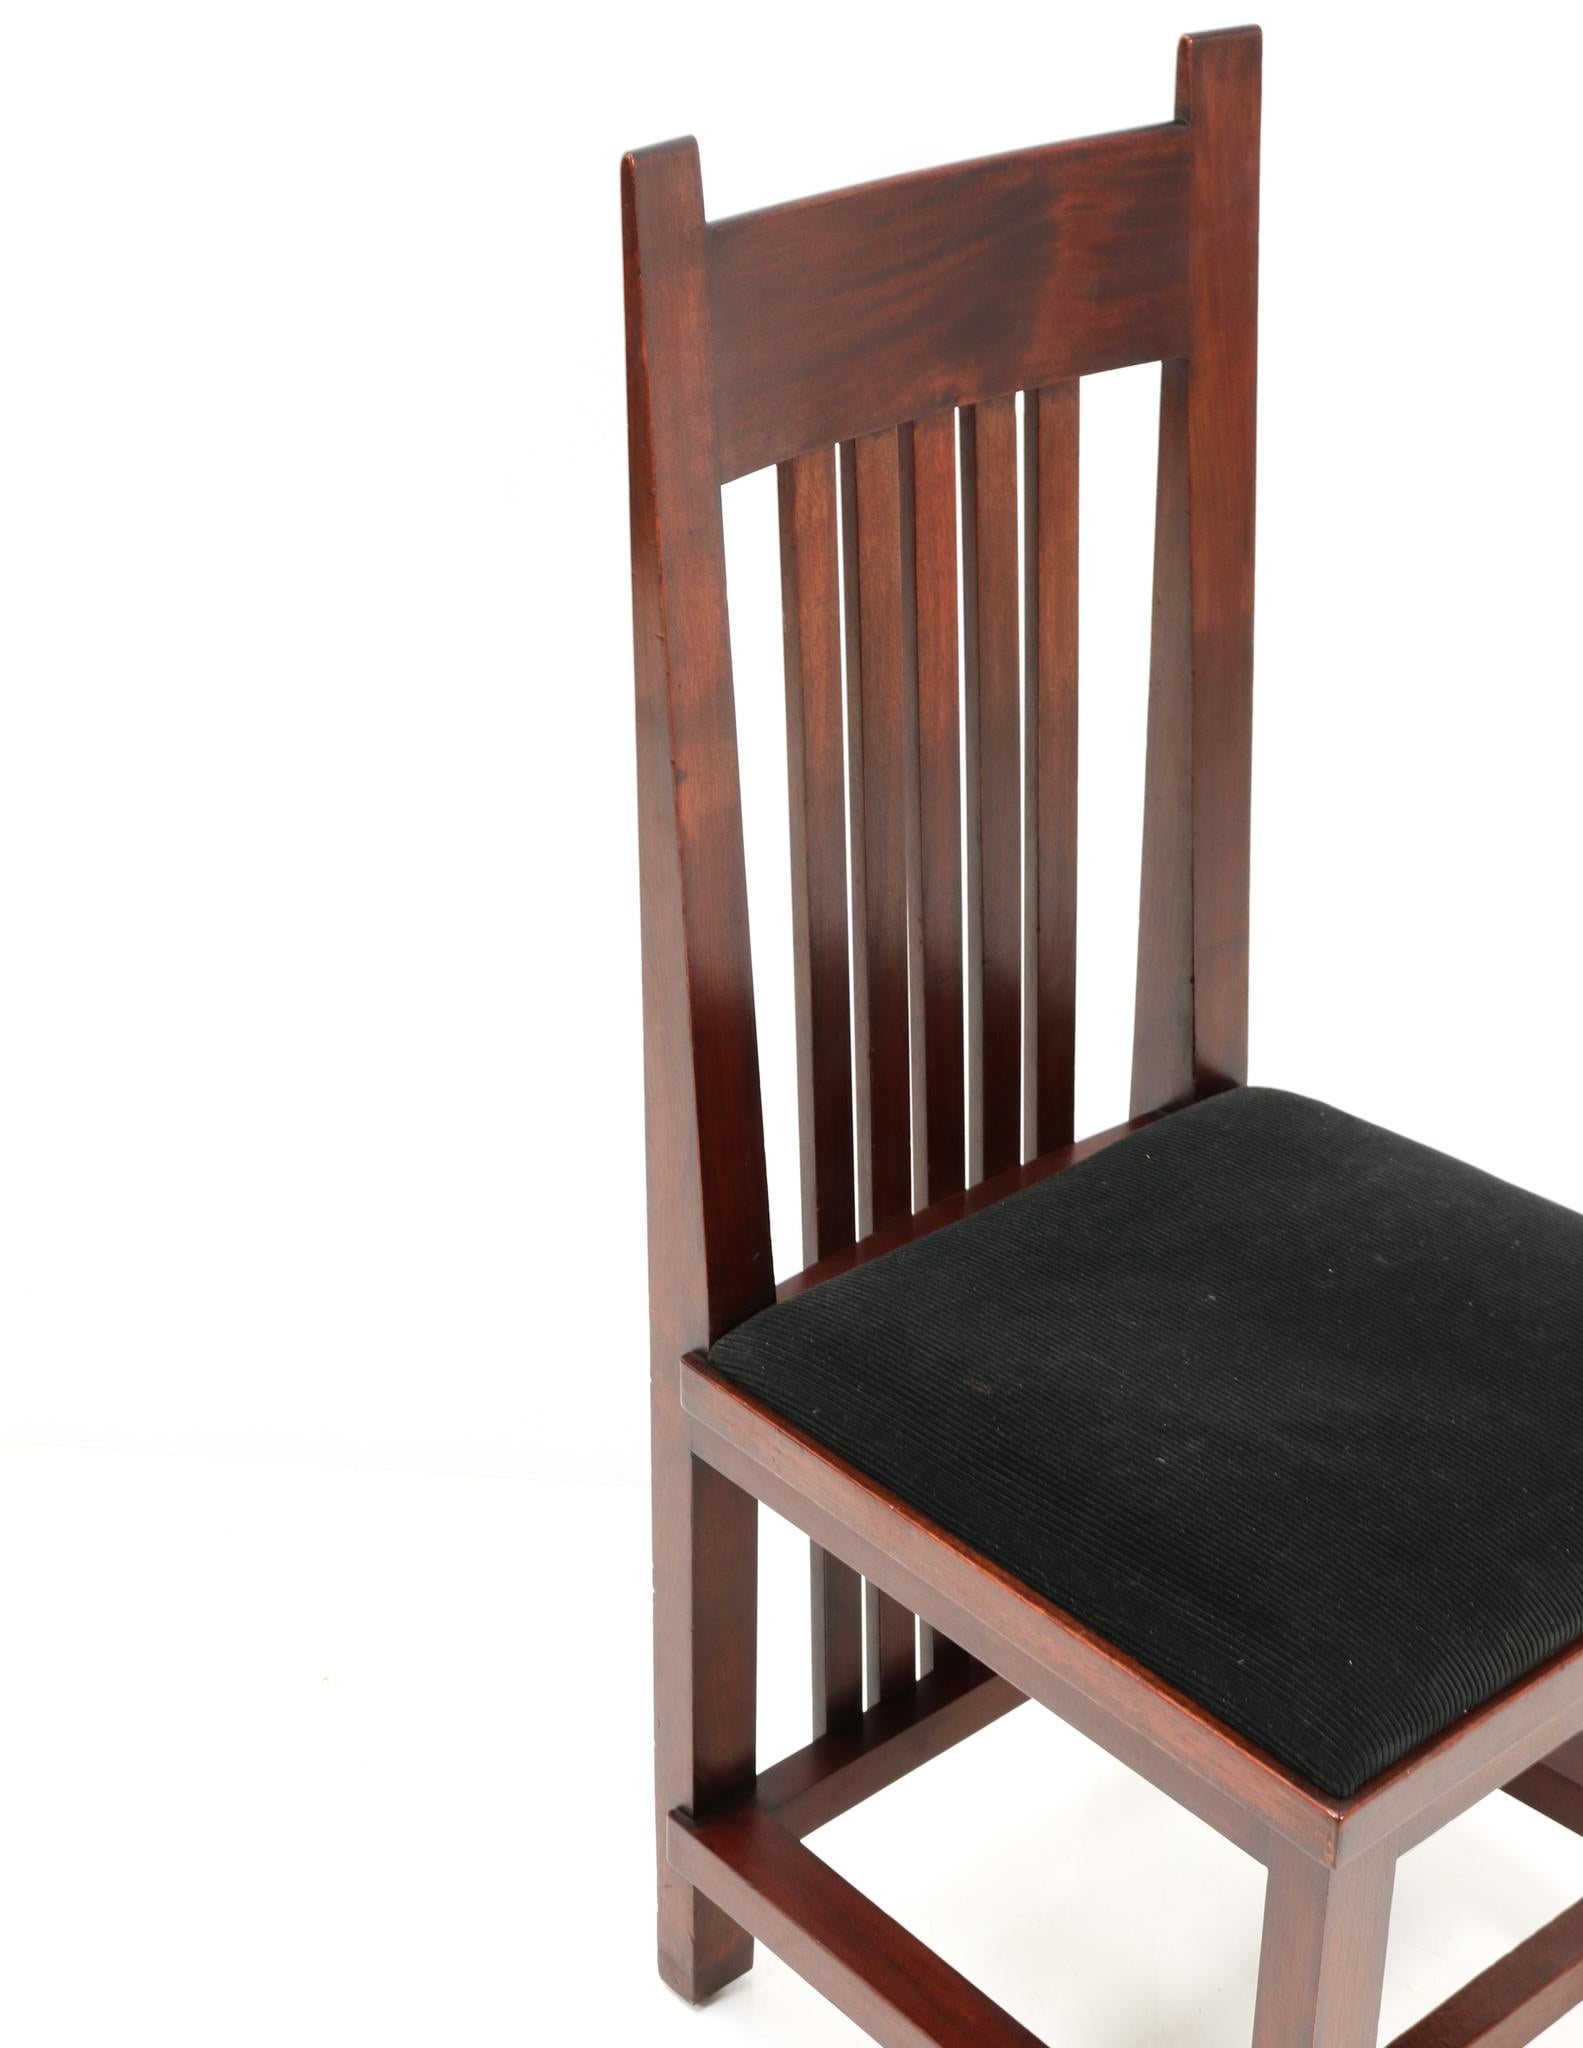 Mahogany Art Deco Modernist High Back Chair by Hendrik Wouda for Pander, 1924 For Sale 3